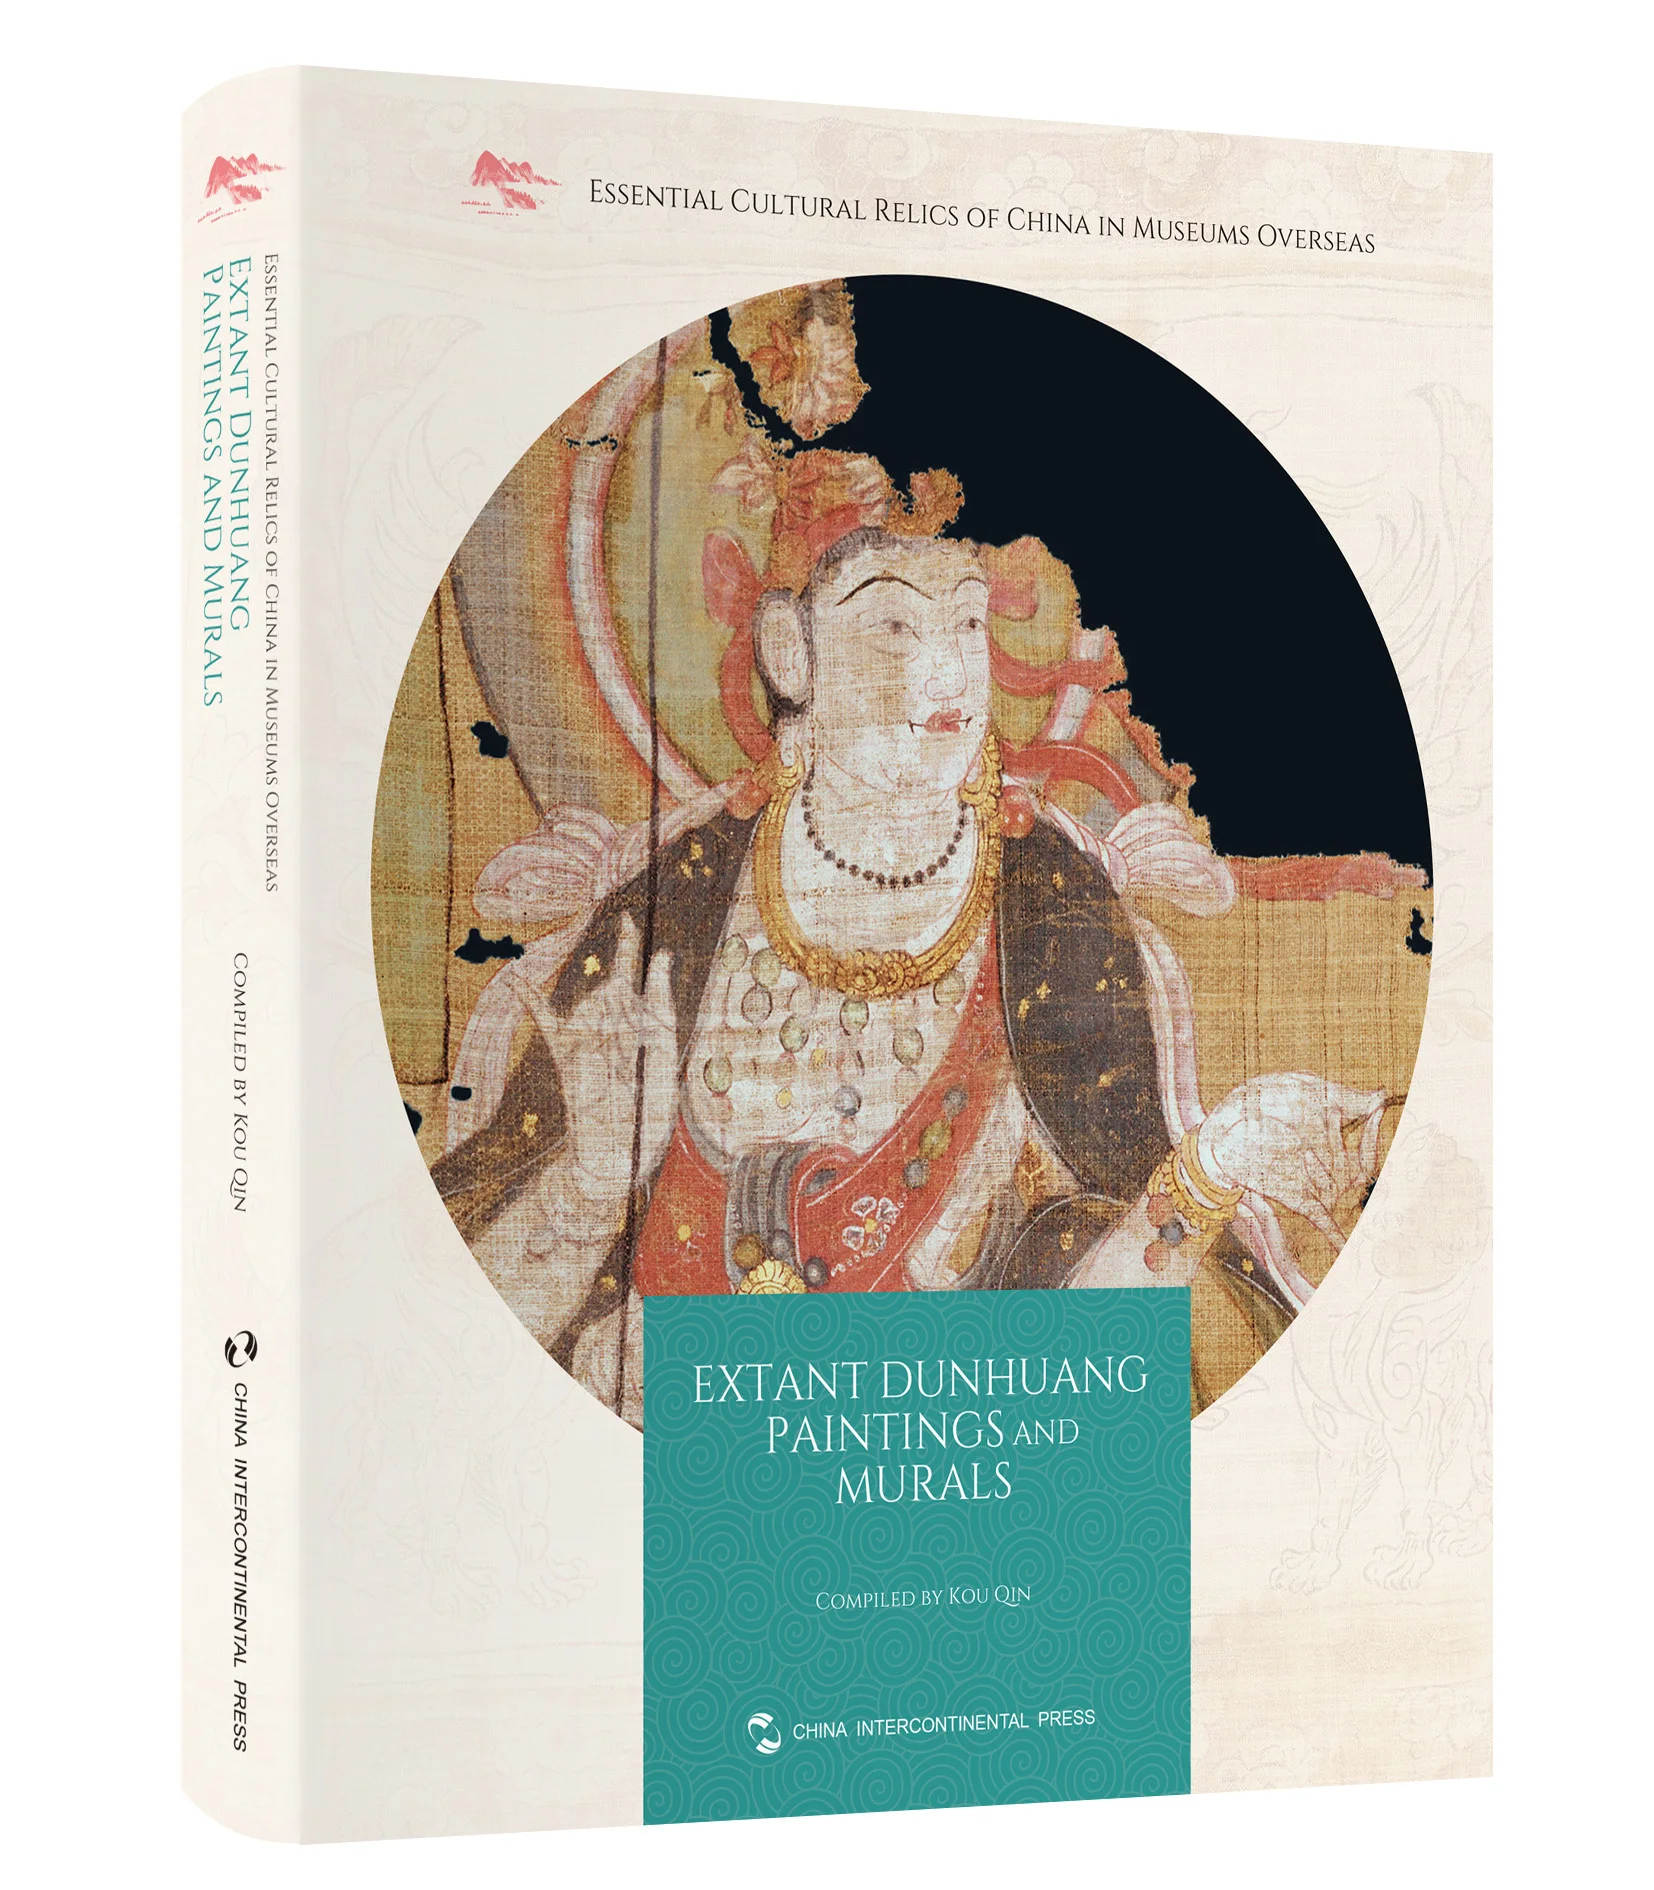 Essential Cultural Relics of China in Museums Overseas：Extant Dunhuang Paintings and Murals